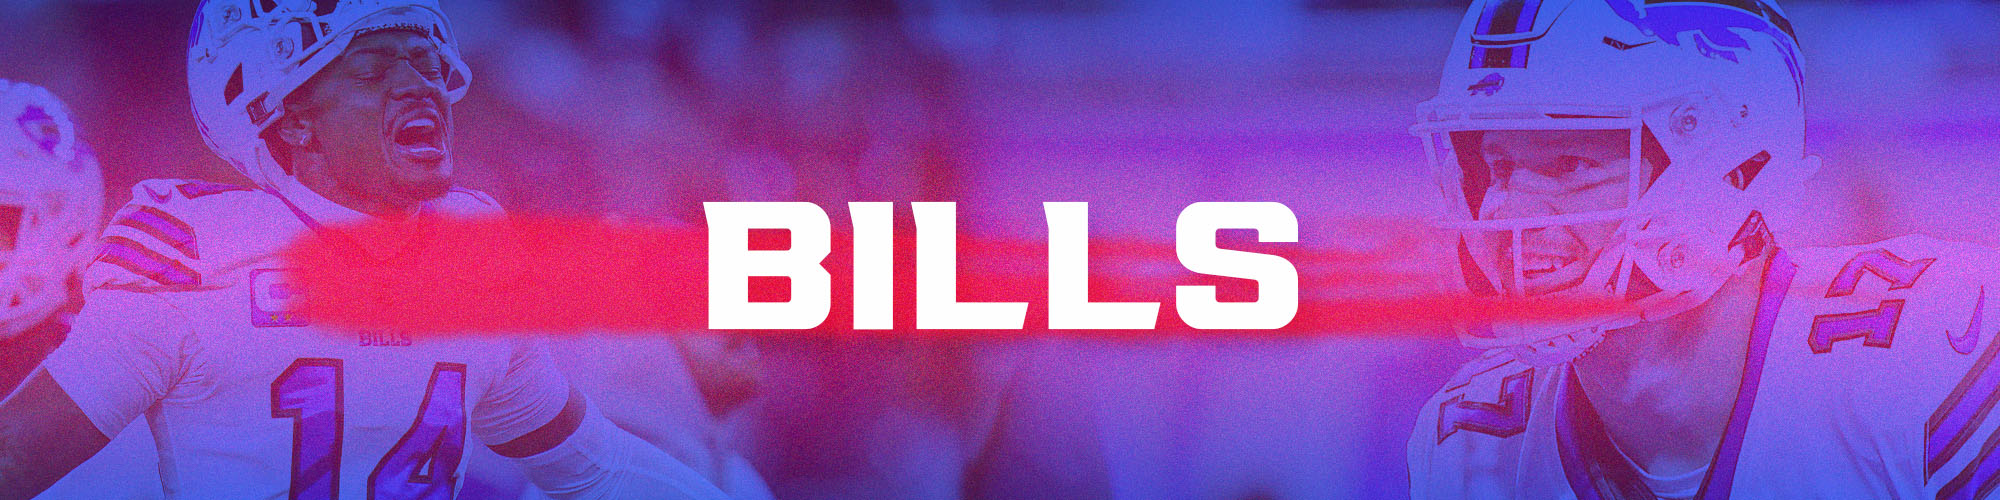 Buffalo Bills News, Rumors, Scores, Schedule, Stats and Roster